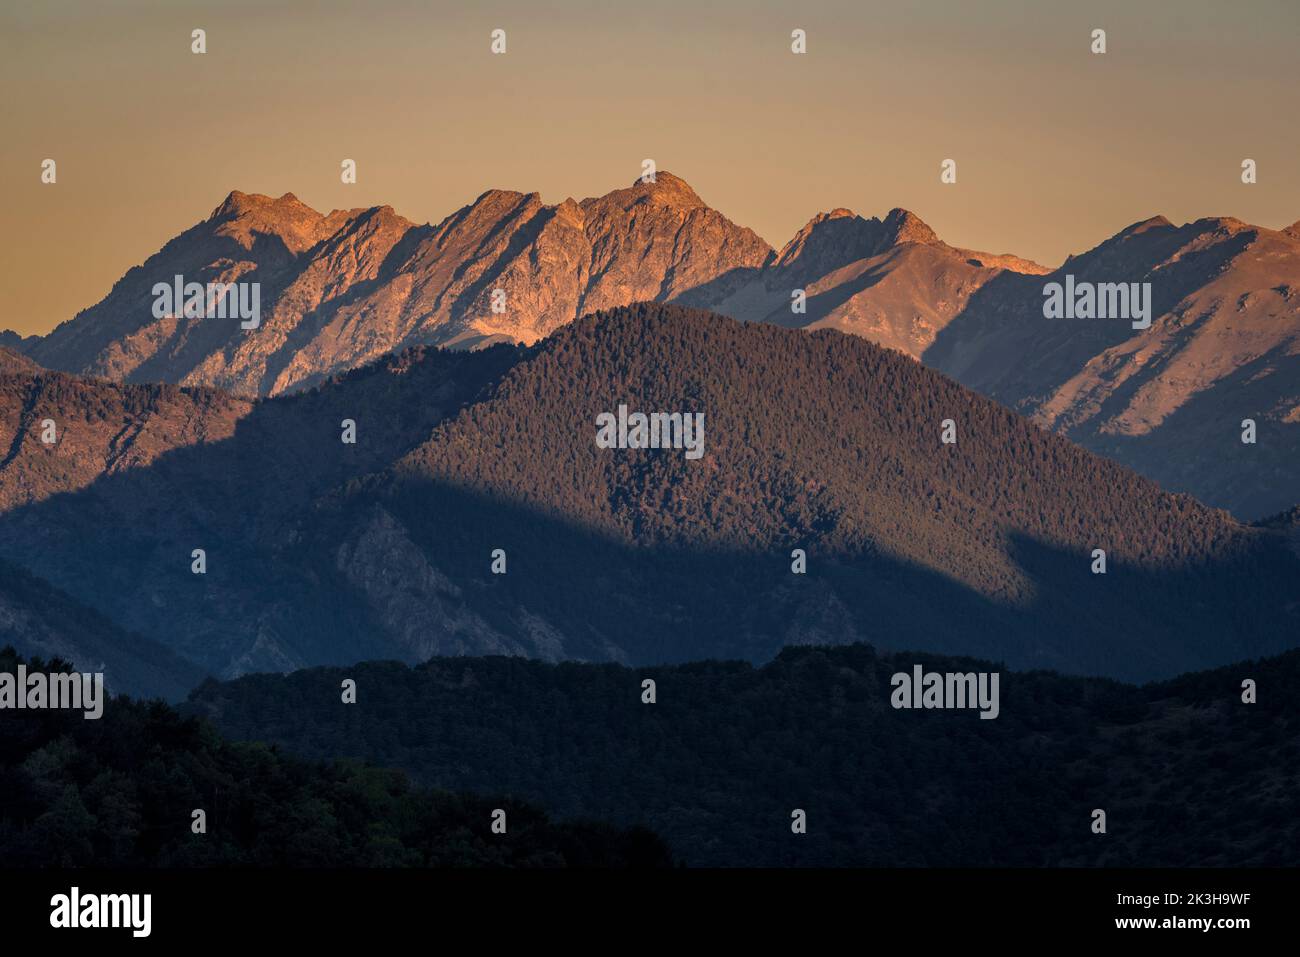 Sunrise over the mountains of the Aigüestortes i Estany de Sant Maurici National Park, seen from Alendo, in the Alt Pirineu natural park (Pyrenees) Stock Photo